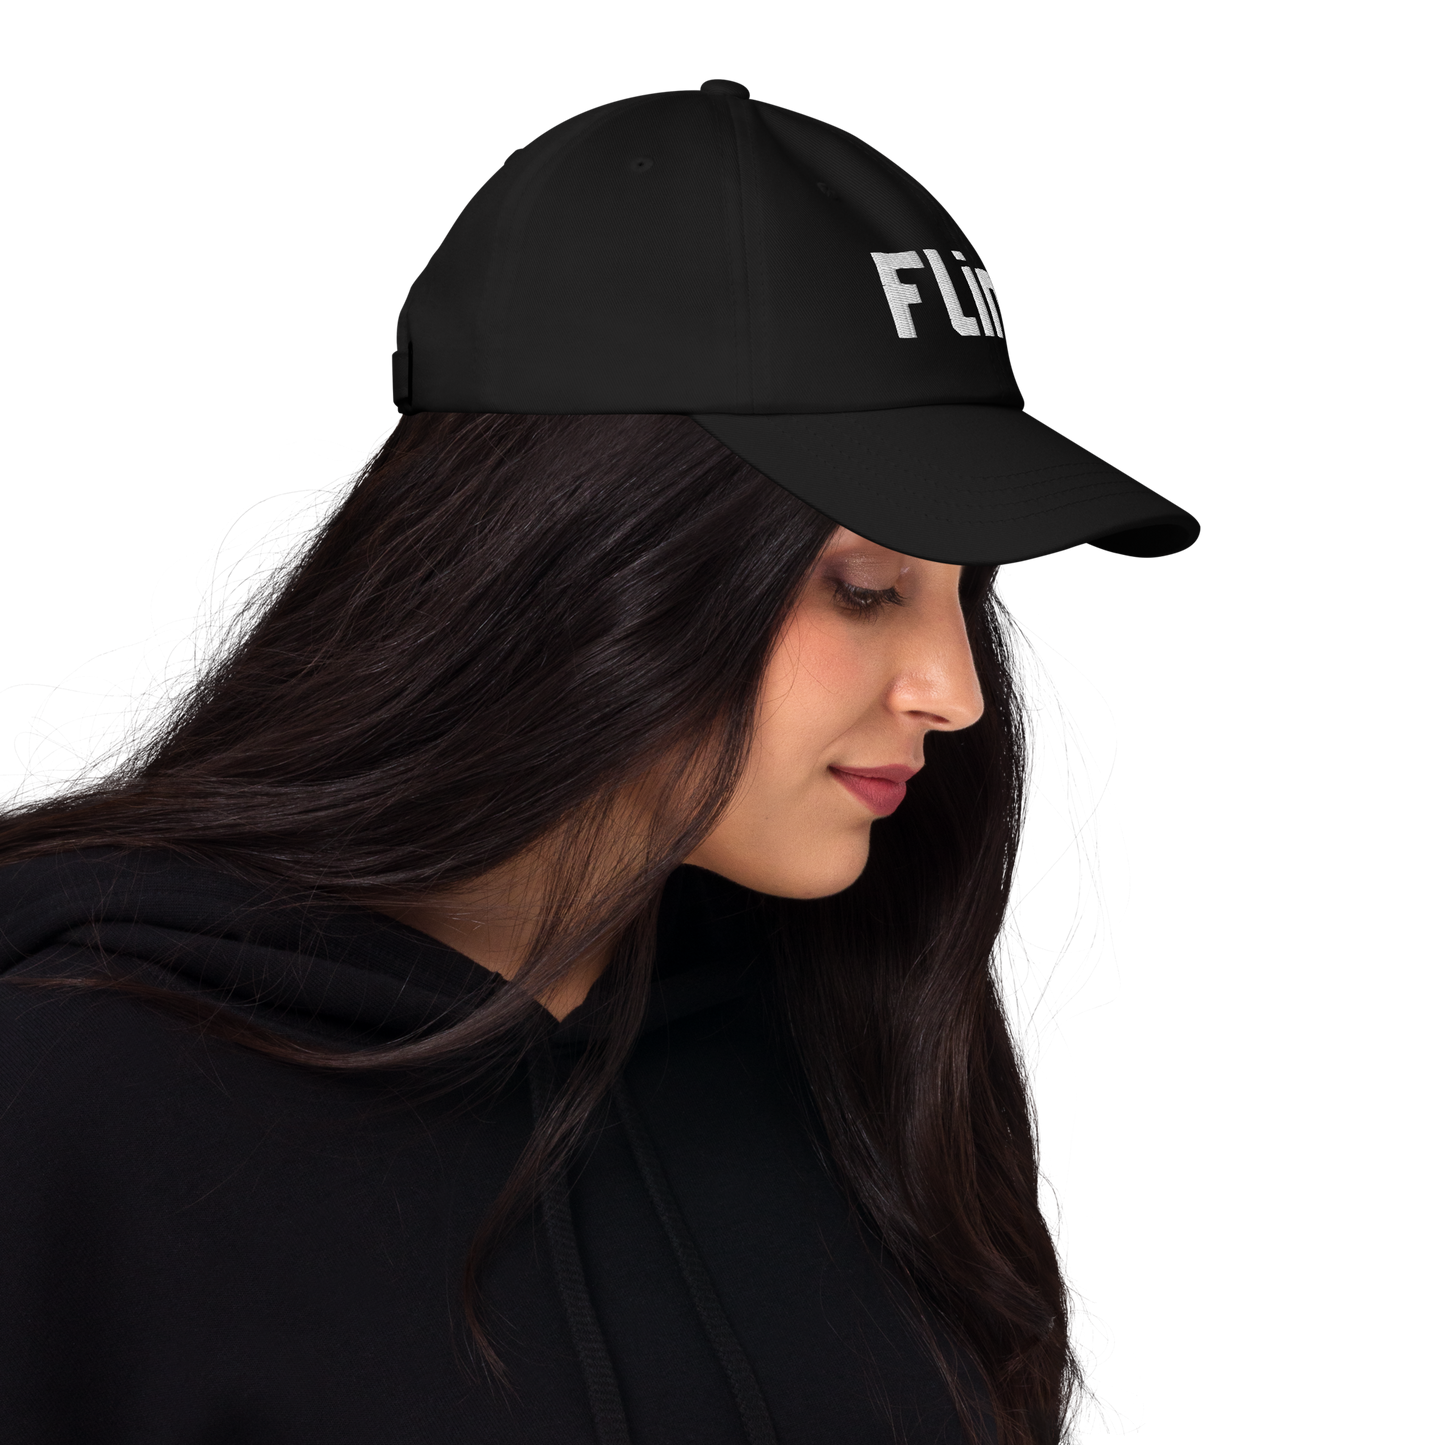 'Flint' Dad Hat | White/Black Embroidery